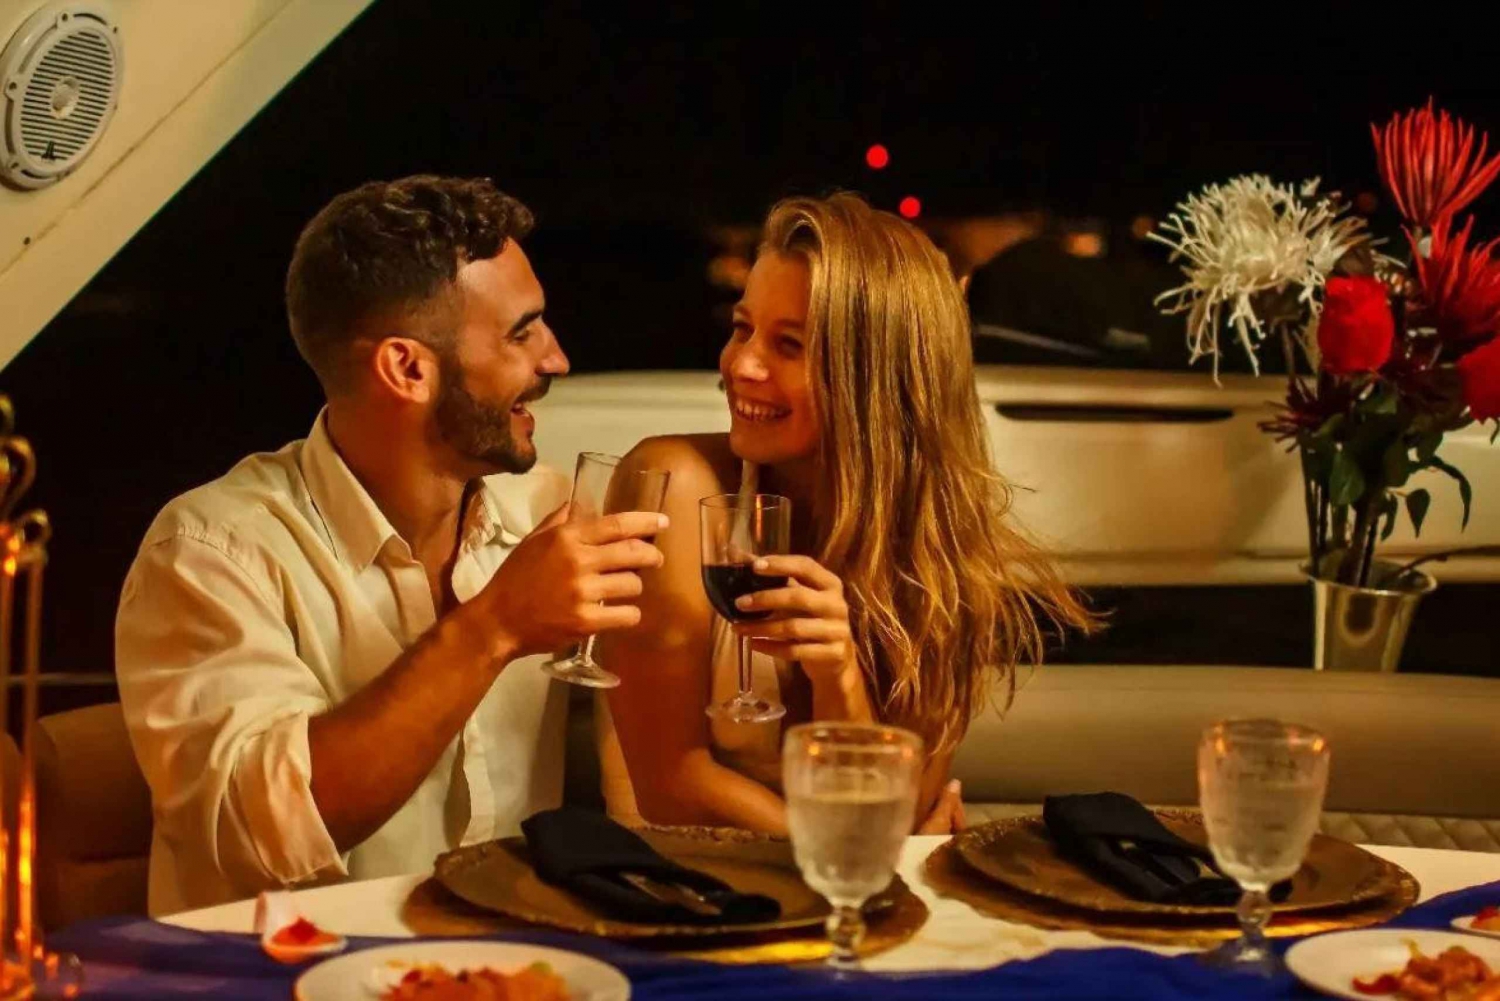 Barcelona: Night on a private Yatch with romantic dinner